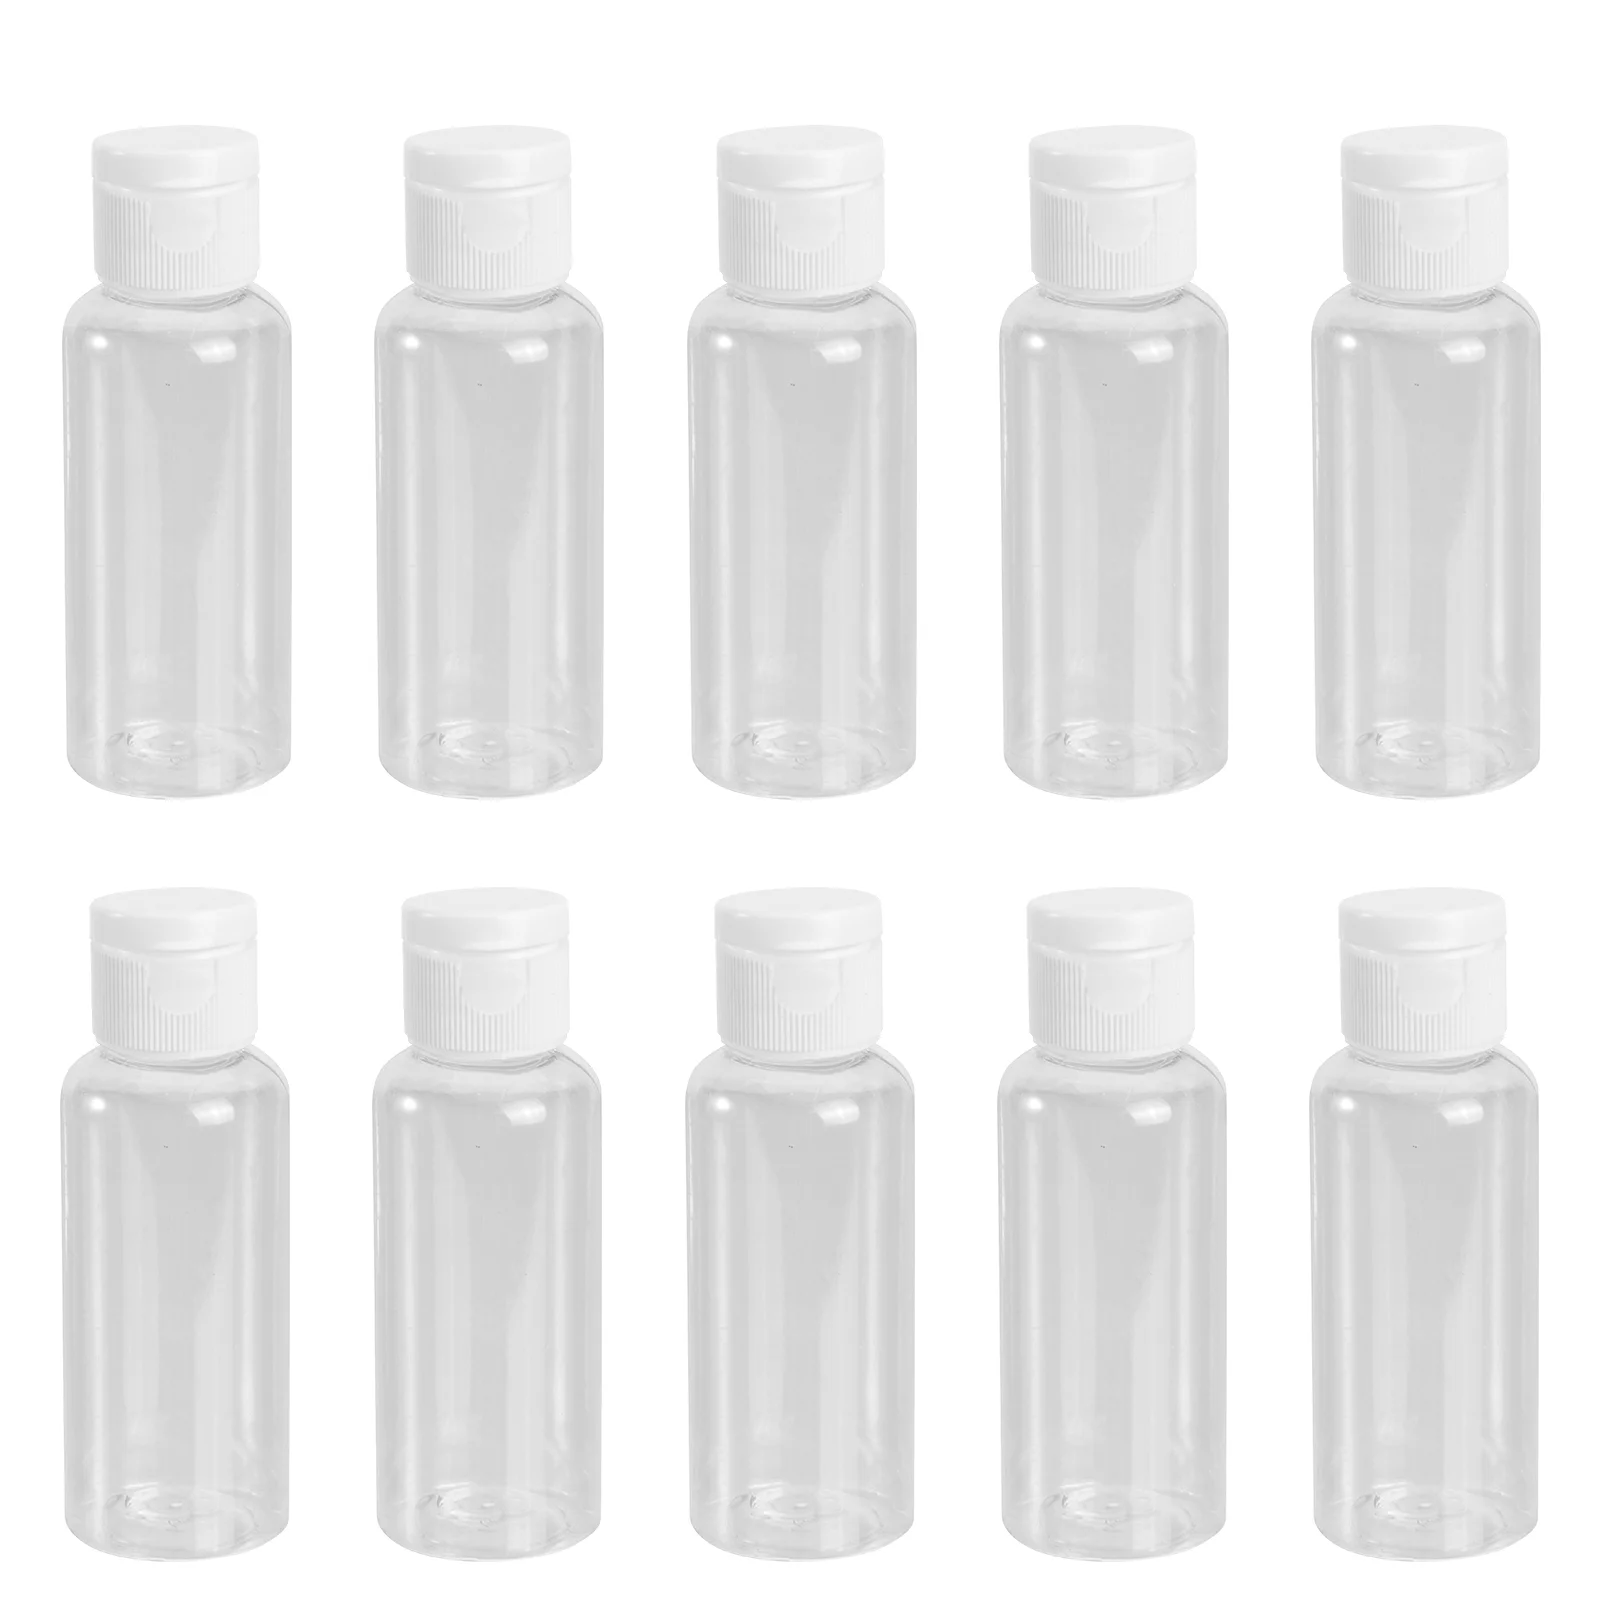 

10Pcs 50ml Clear Cap Bottle Portable Dispenser Small Empty Bottle Lotion Container for Outing Travel